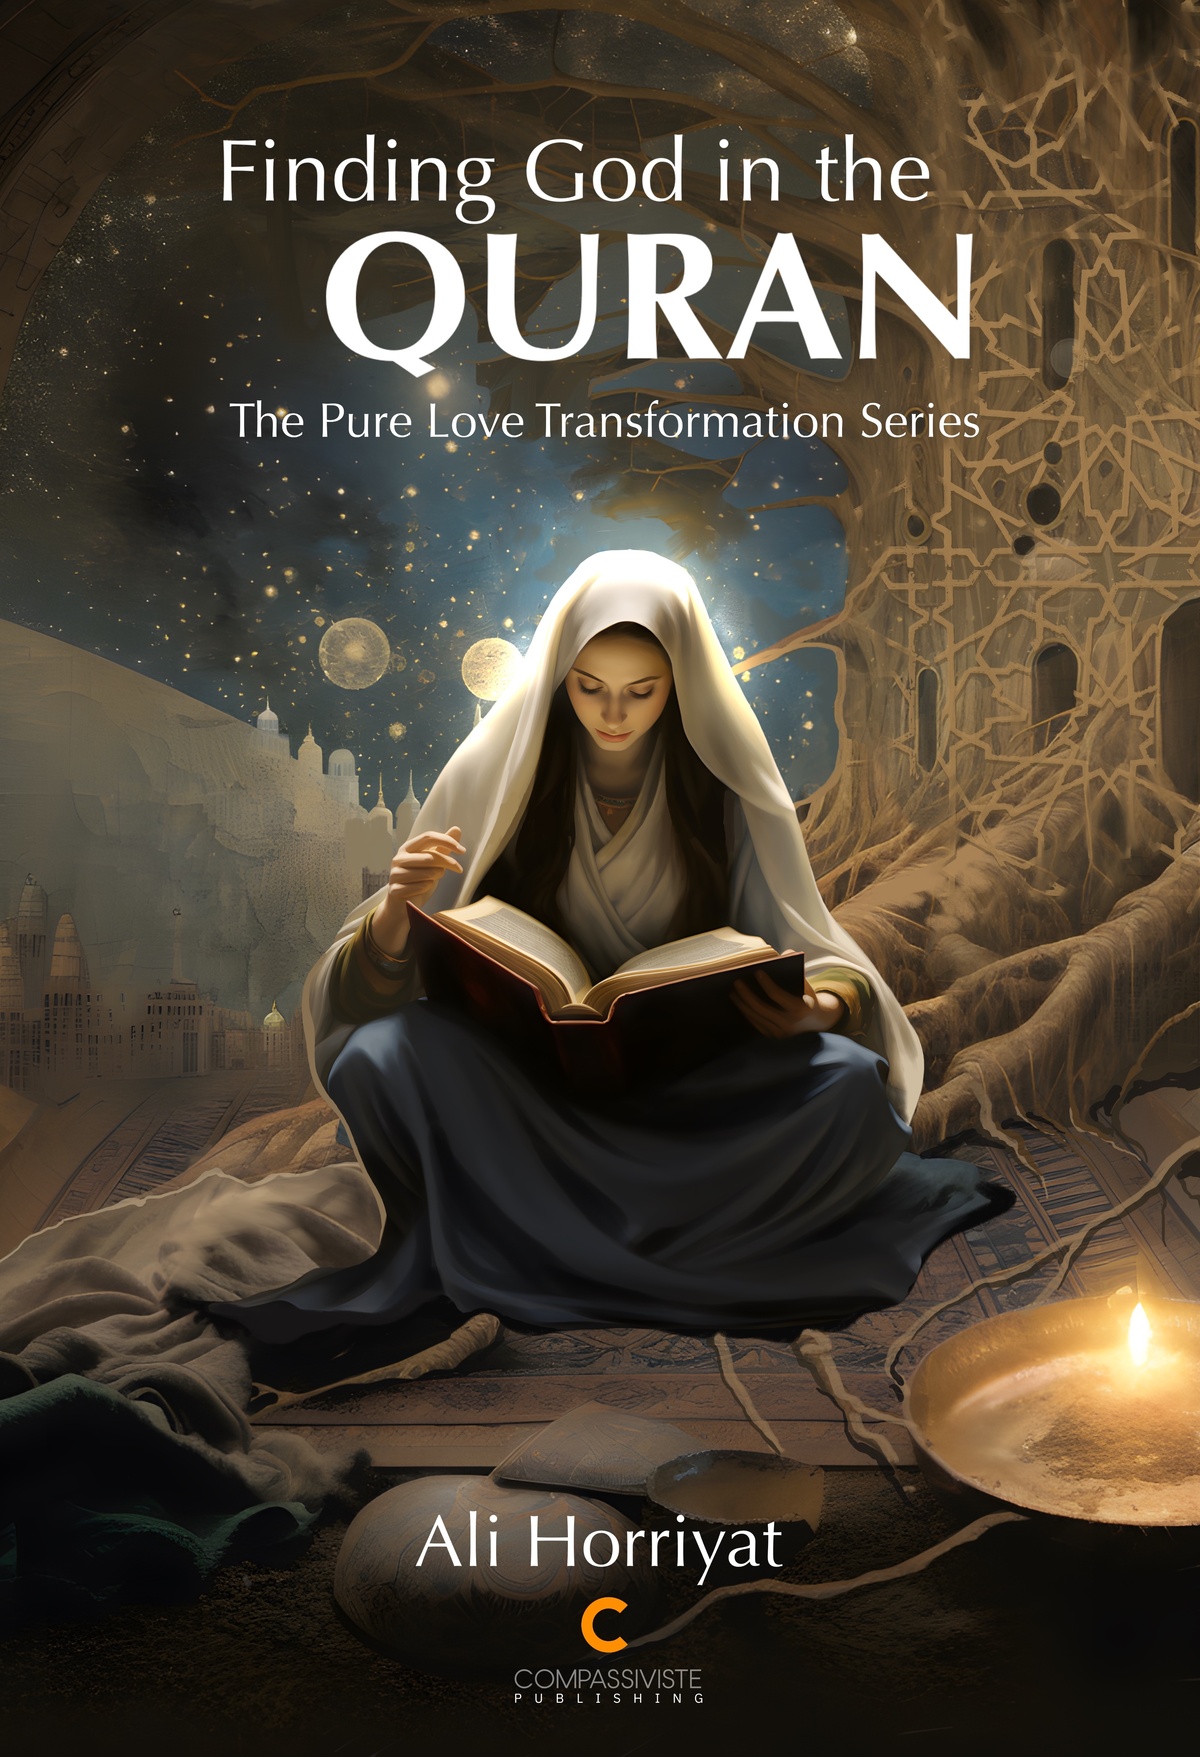 Book cover of Finding God in the Quran by Ali Horriyat